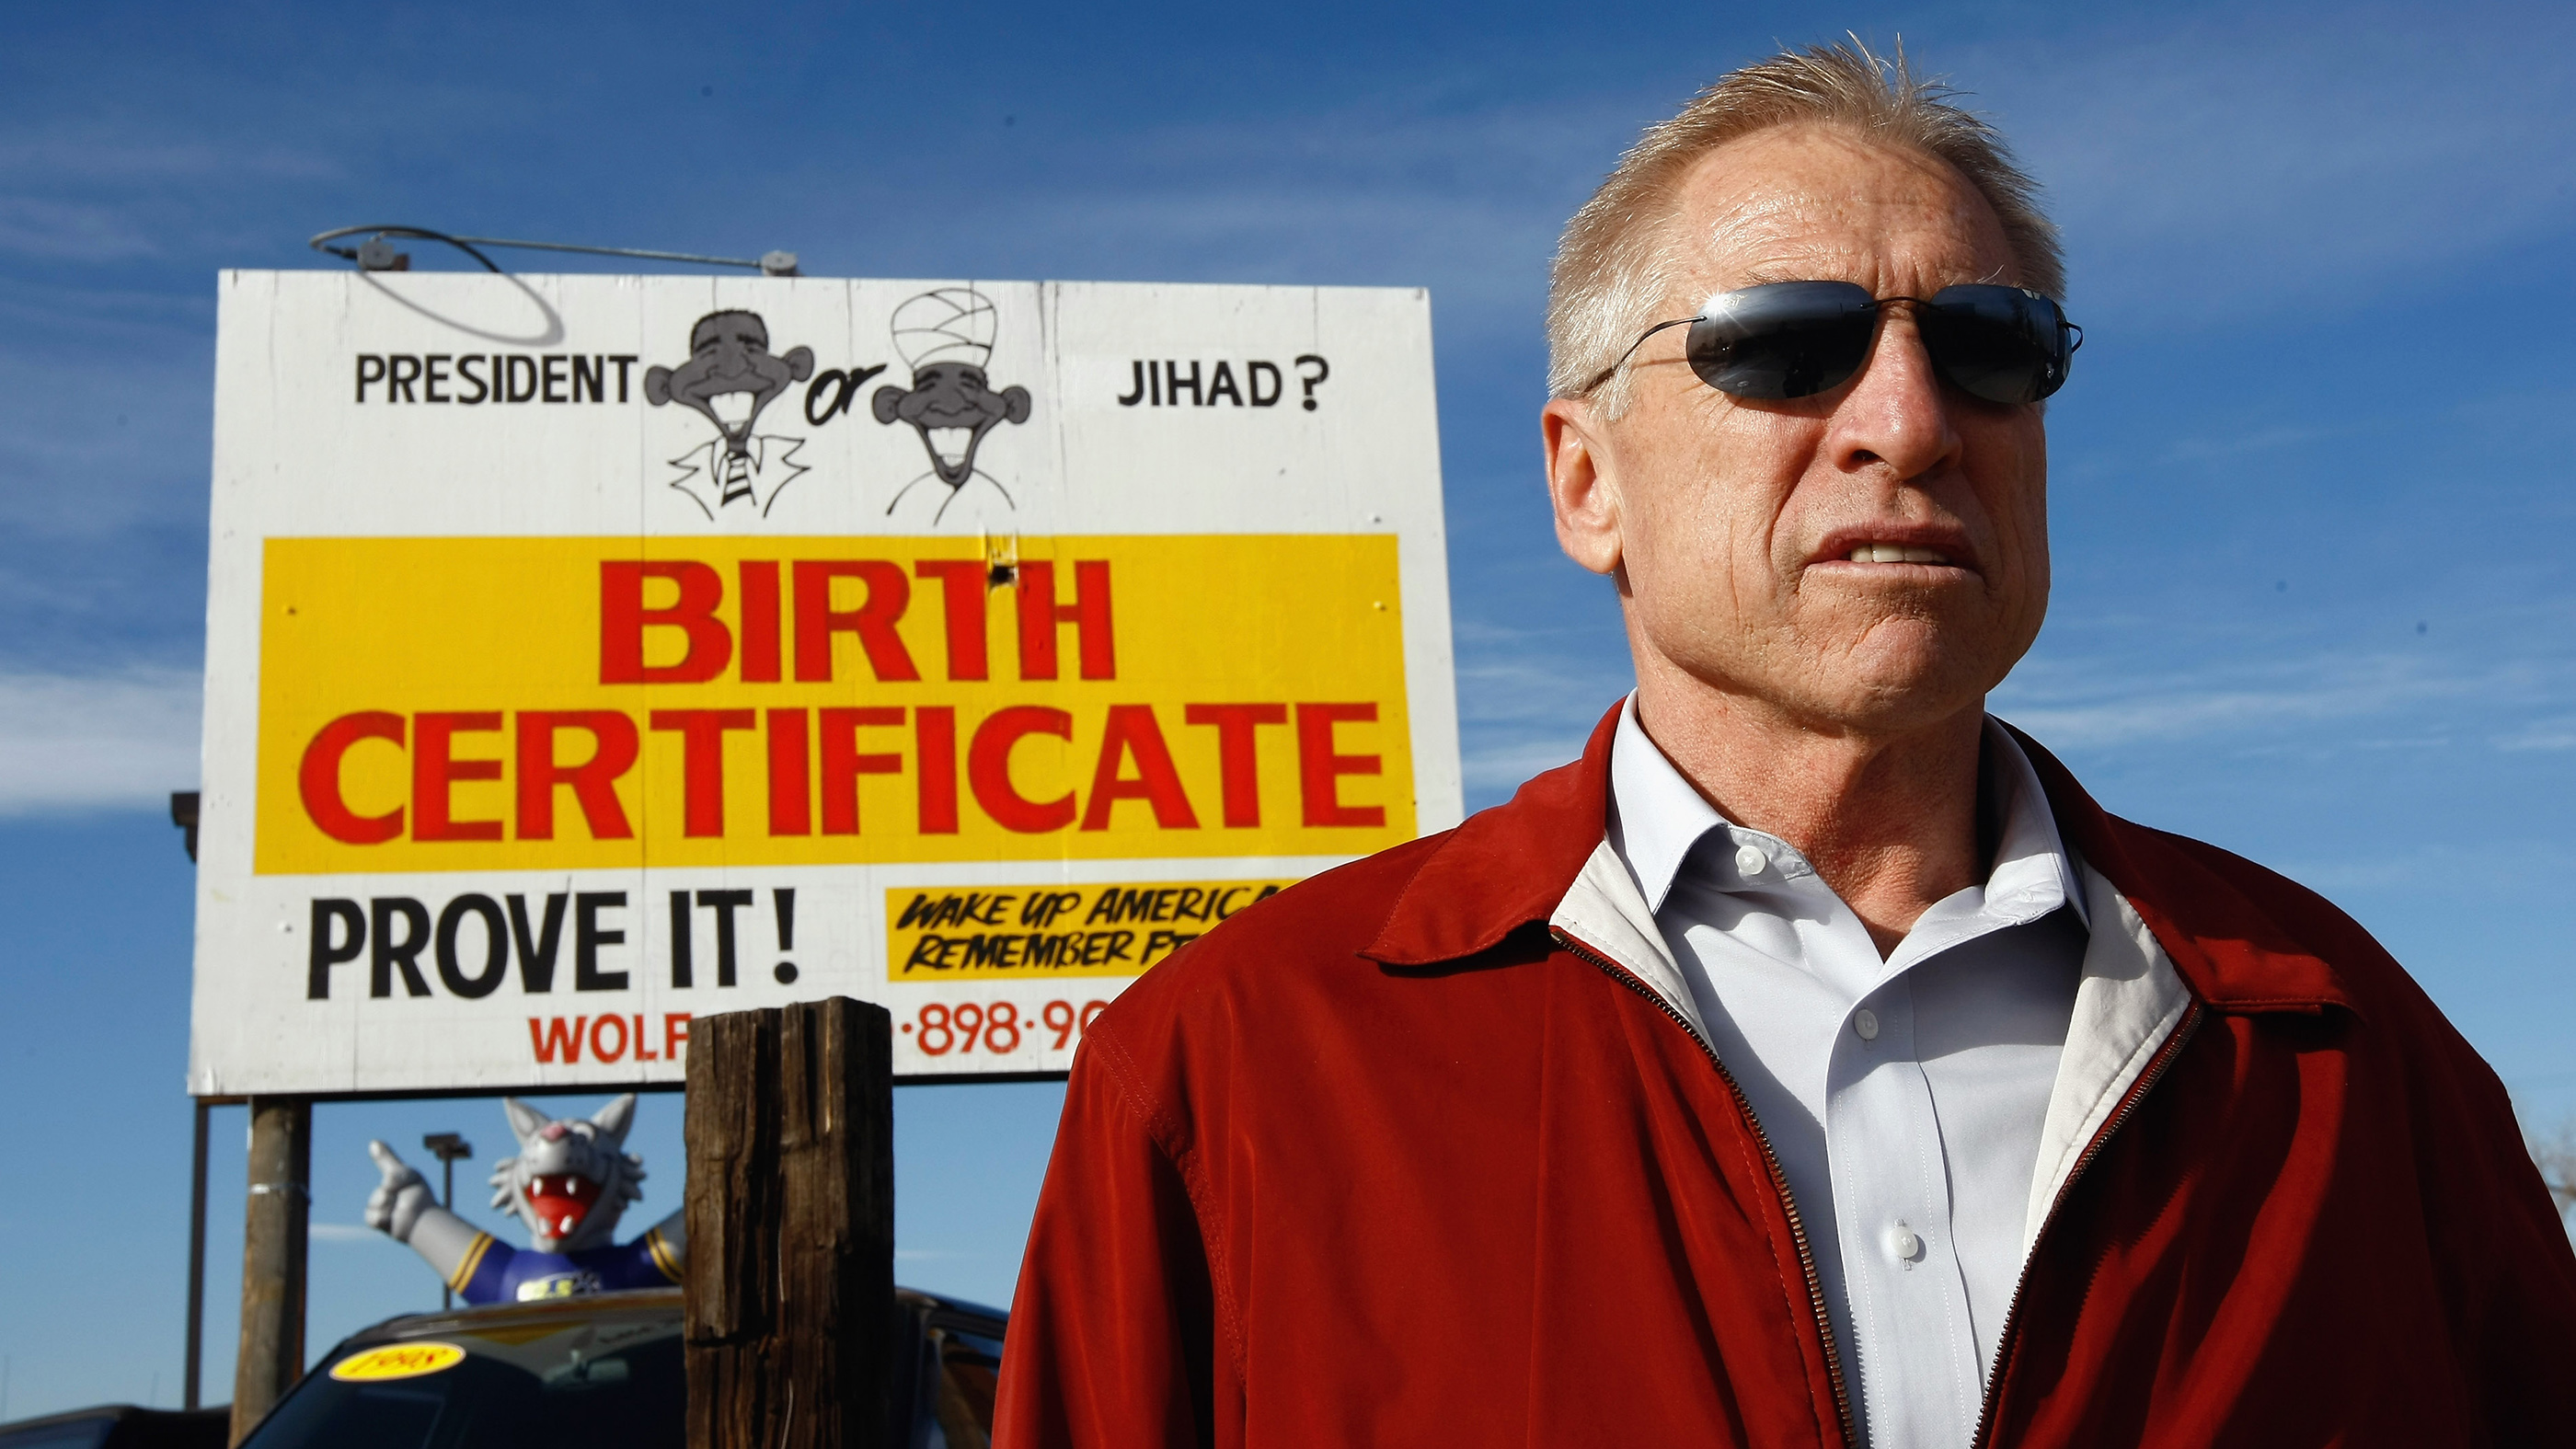 Phil Wolf, owner of a used car dealership, paid $2,500 to have this “birther” billboard painted, shown here on Nov. 21, 2009 in Wheat Ridge, Colorado.